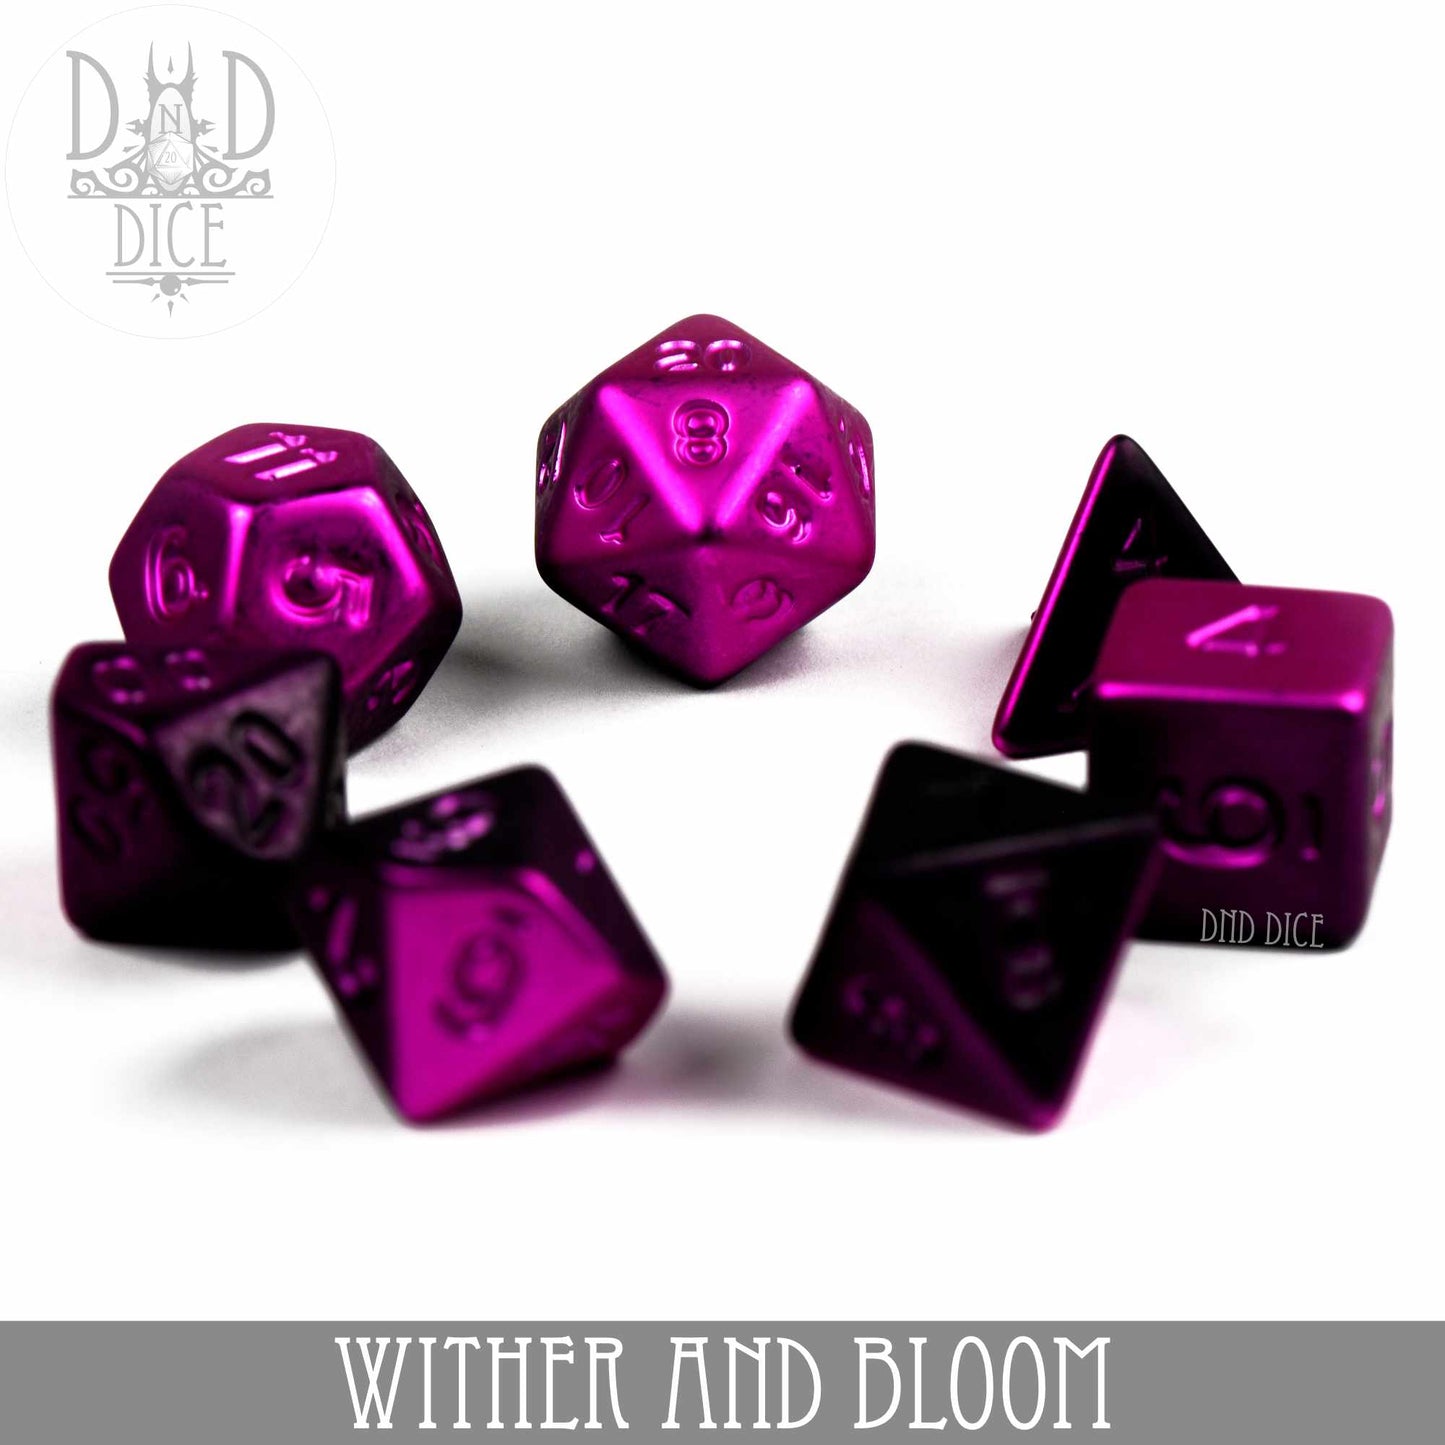 Wither and Bloom Dice Set